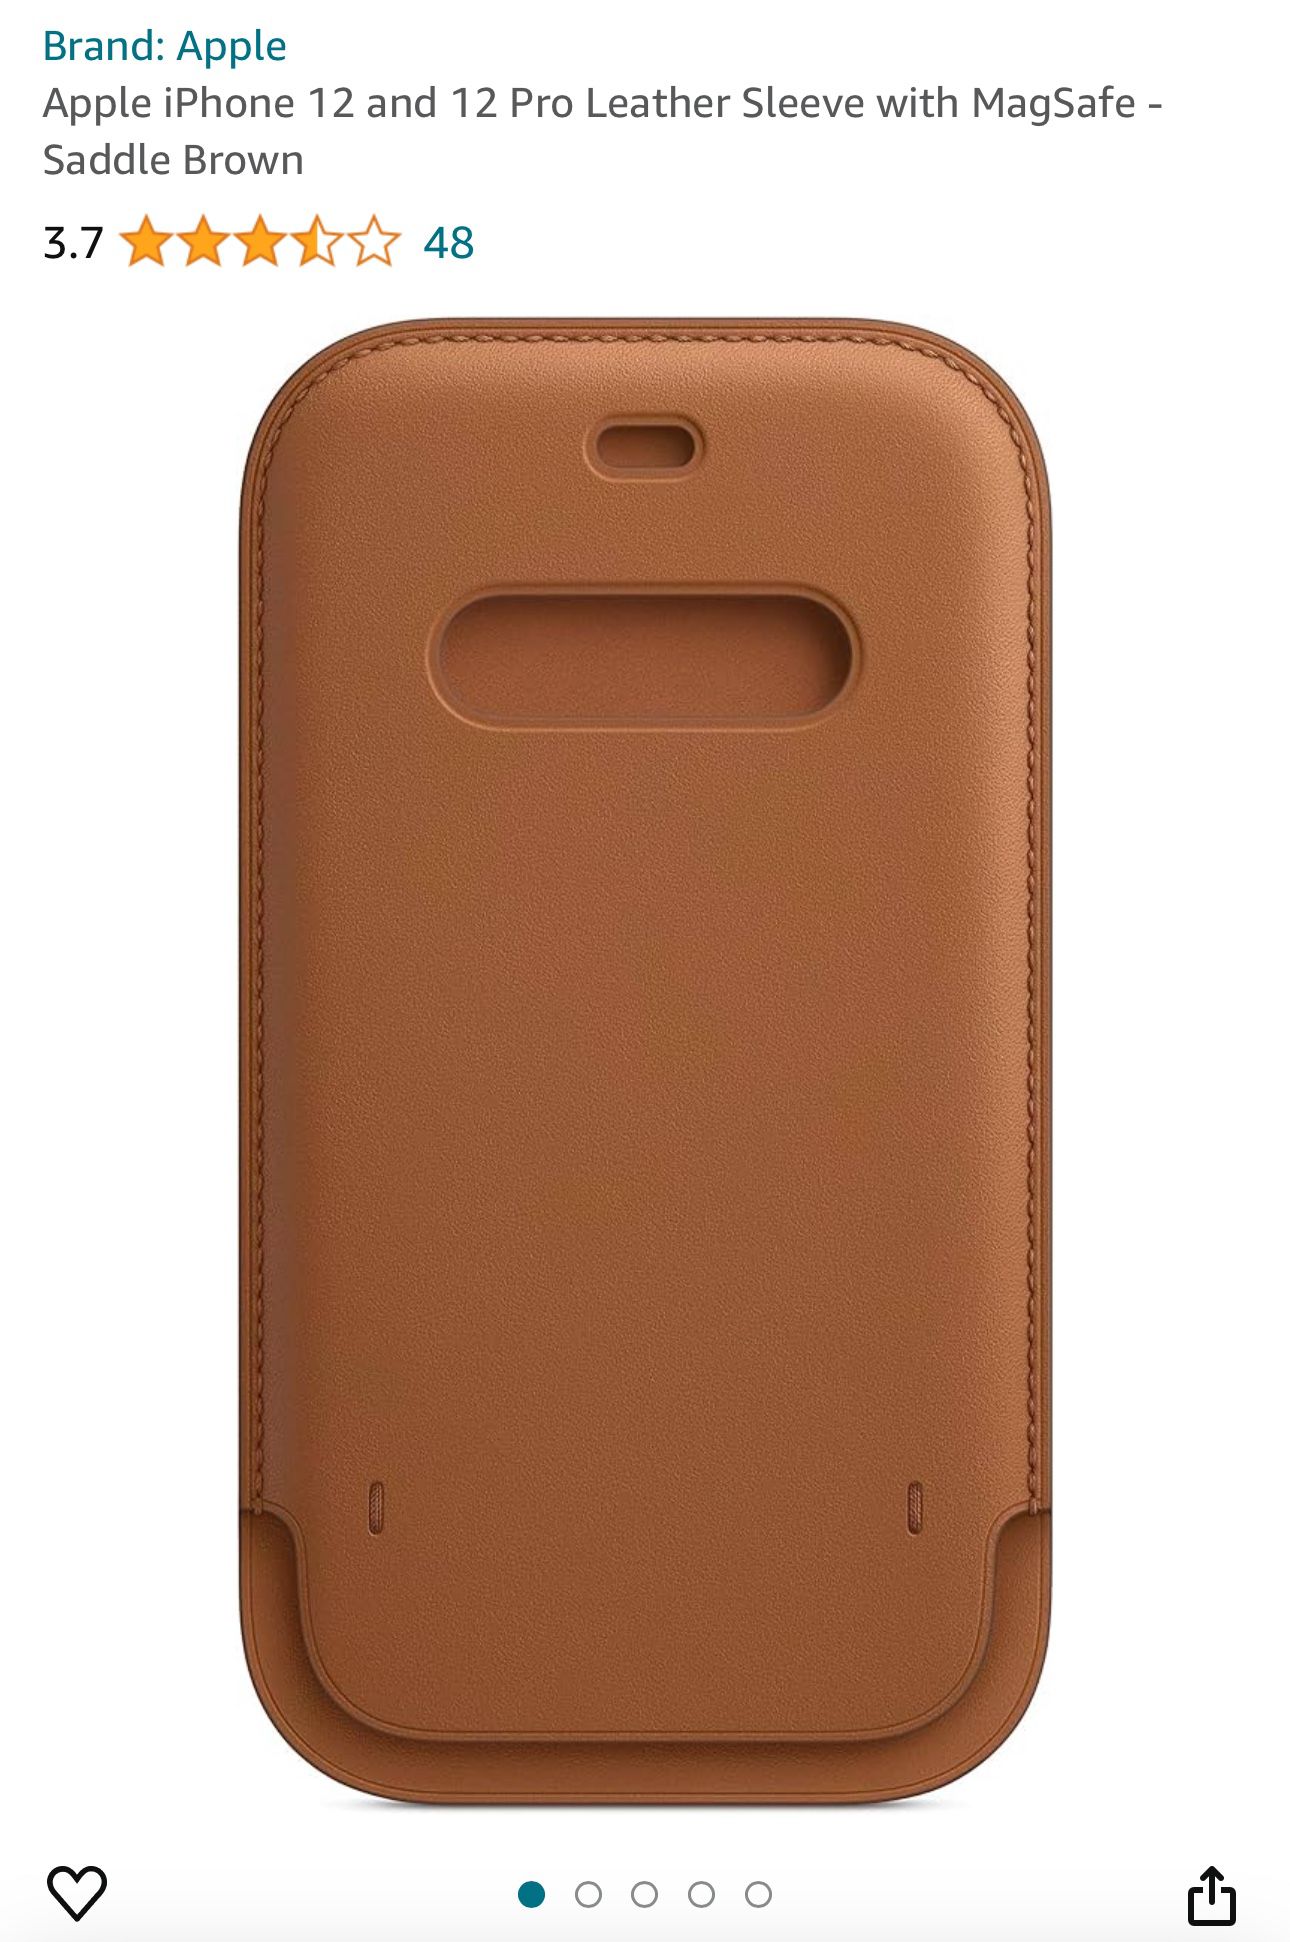 Apple iPhone 12 and 12 Pro Leather Sleeve with MagSafe - Saddle Brown